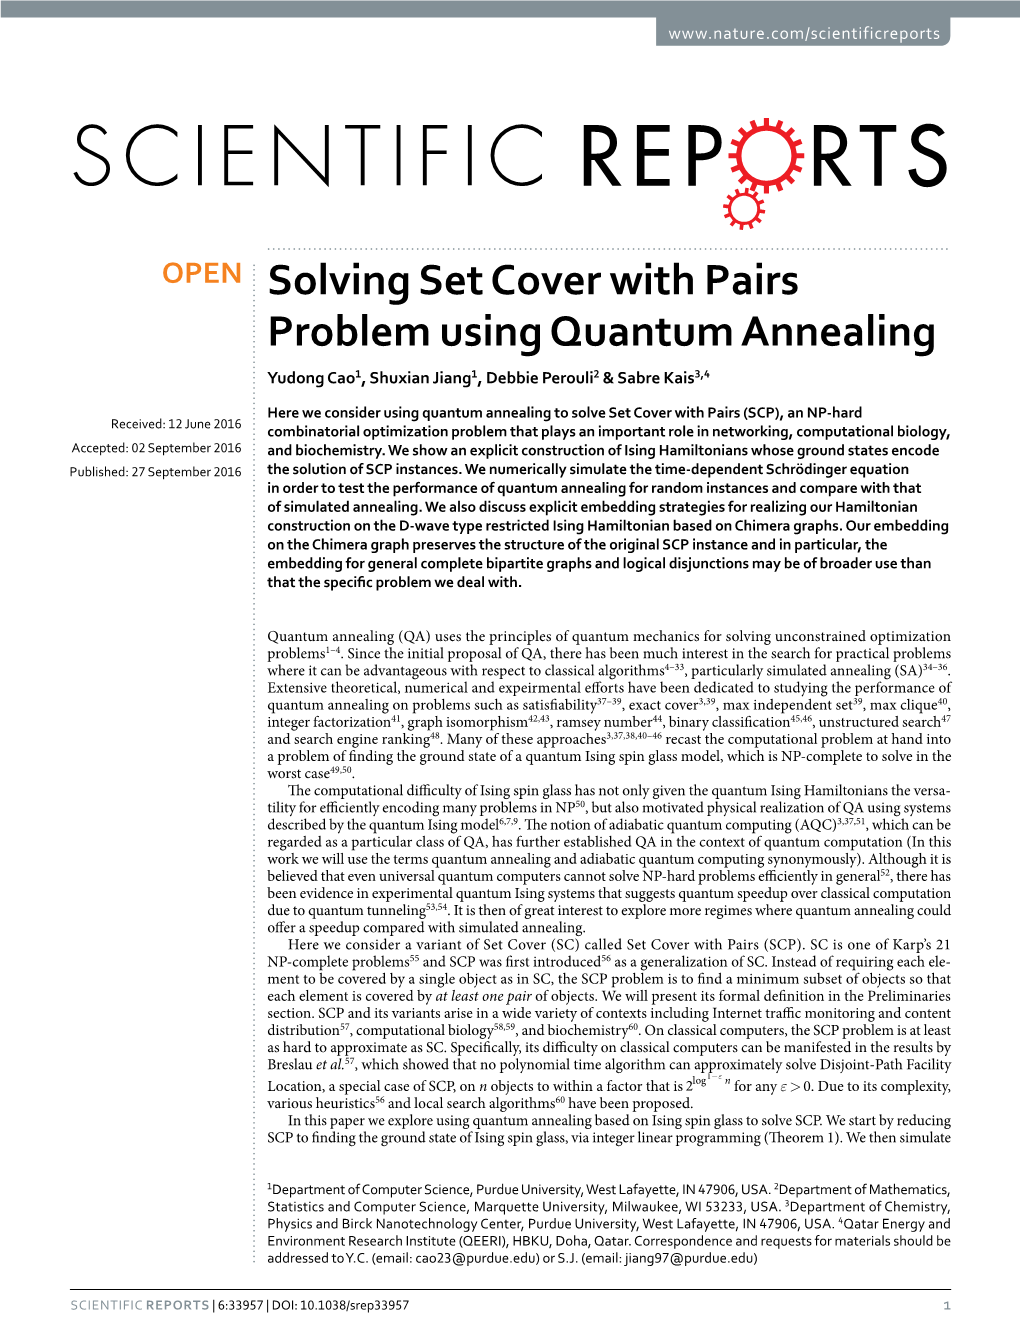 Solving Set Cover with Pairs Problem Using Quantum Annealing Yudong Cao1, Shuxian Jiang1, Debbie Perouli2 & Sabre Kais3,4